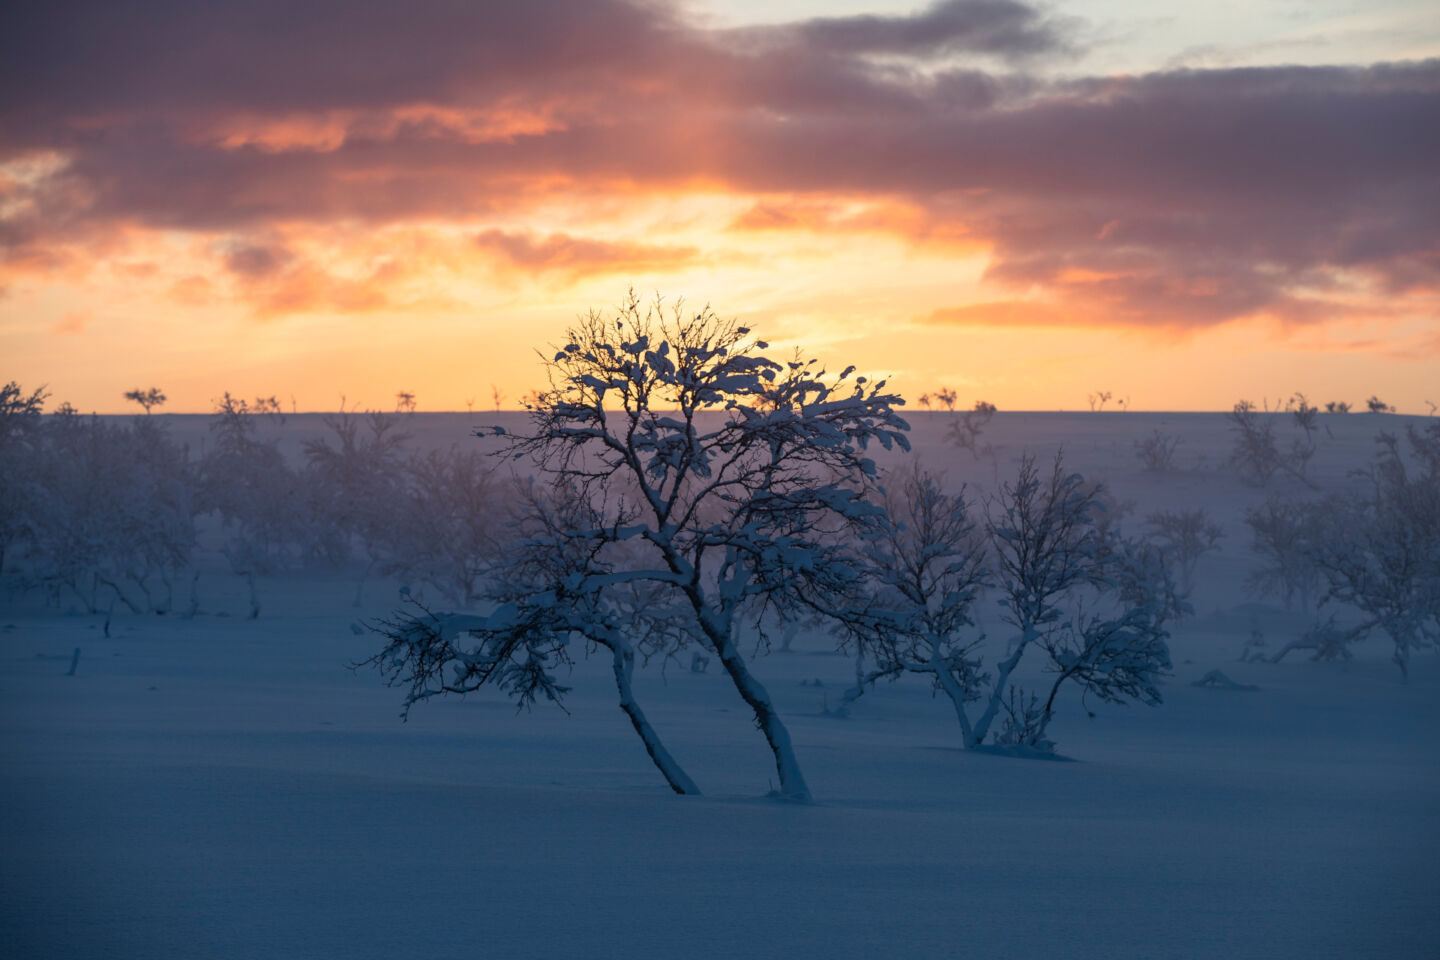 A sunset on a snowy day, a Finnish Lapland filming location